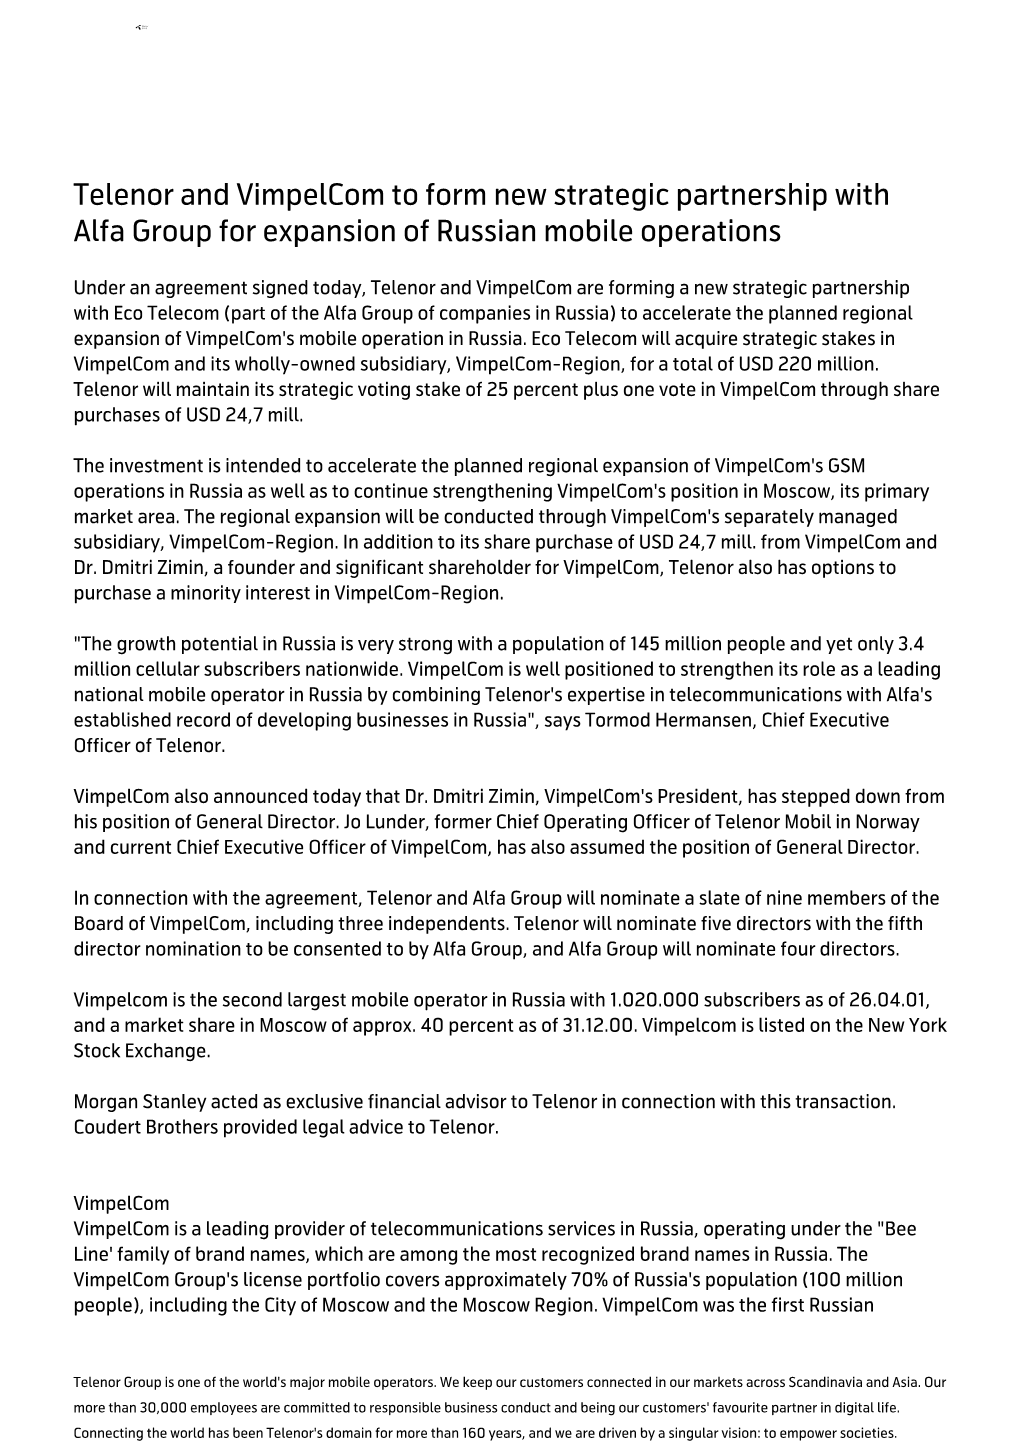 Telenor and Vimpelcom to Form New Strategic Partnership with Alfa Group for Expansion of Russian Mobile Operations